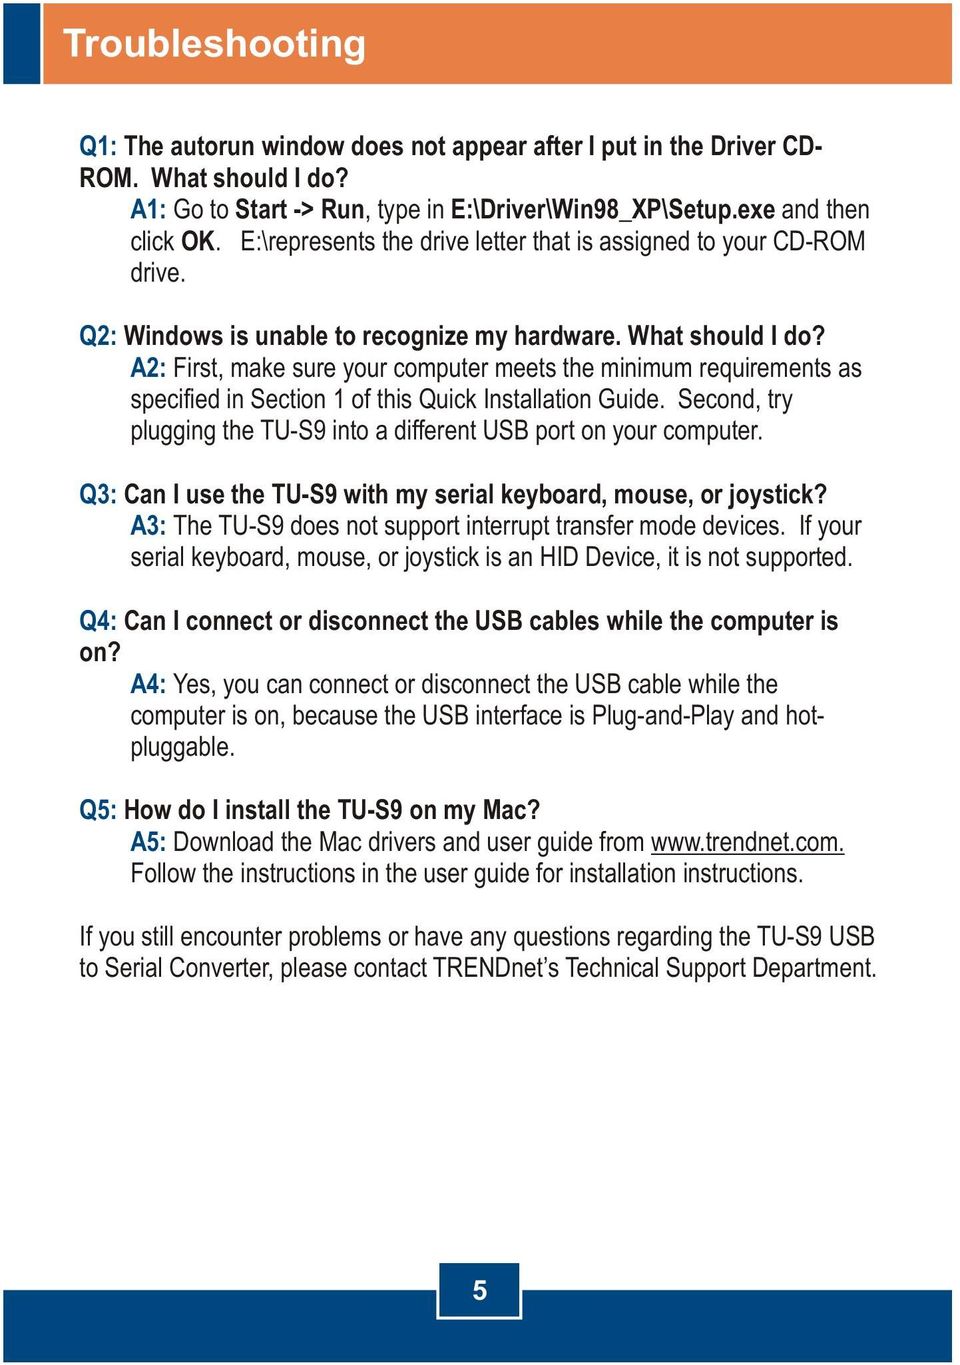 A2: First, make sure your computer meets the minimum requirements as specified in Section 1 of this Quick Installation Guide. Second, try plugging the TU-S9 into a different USB port on your computer.